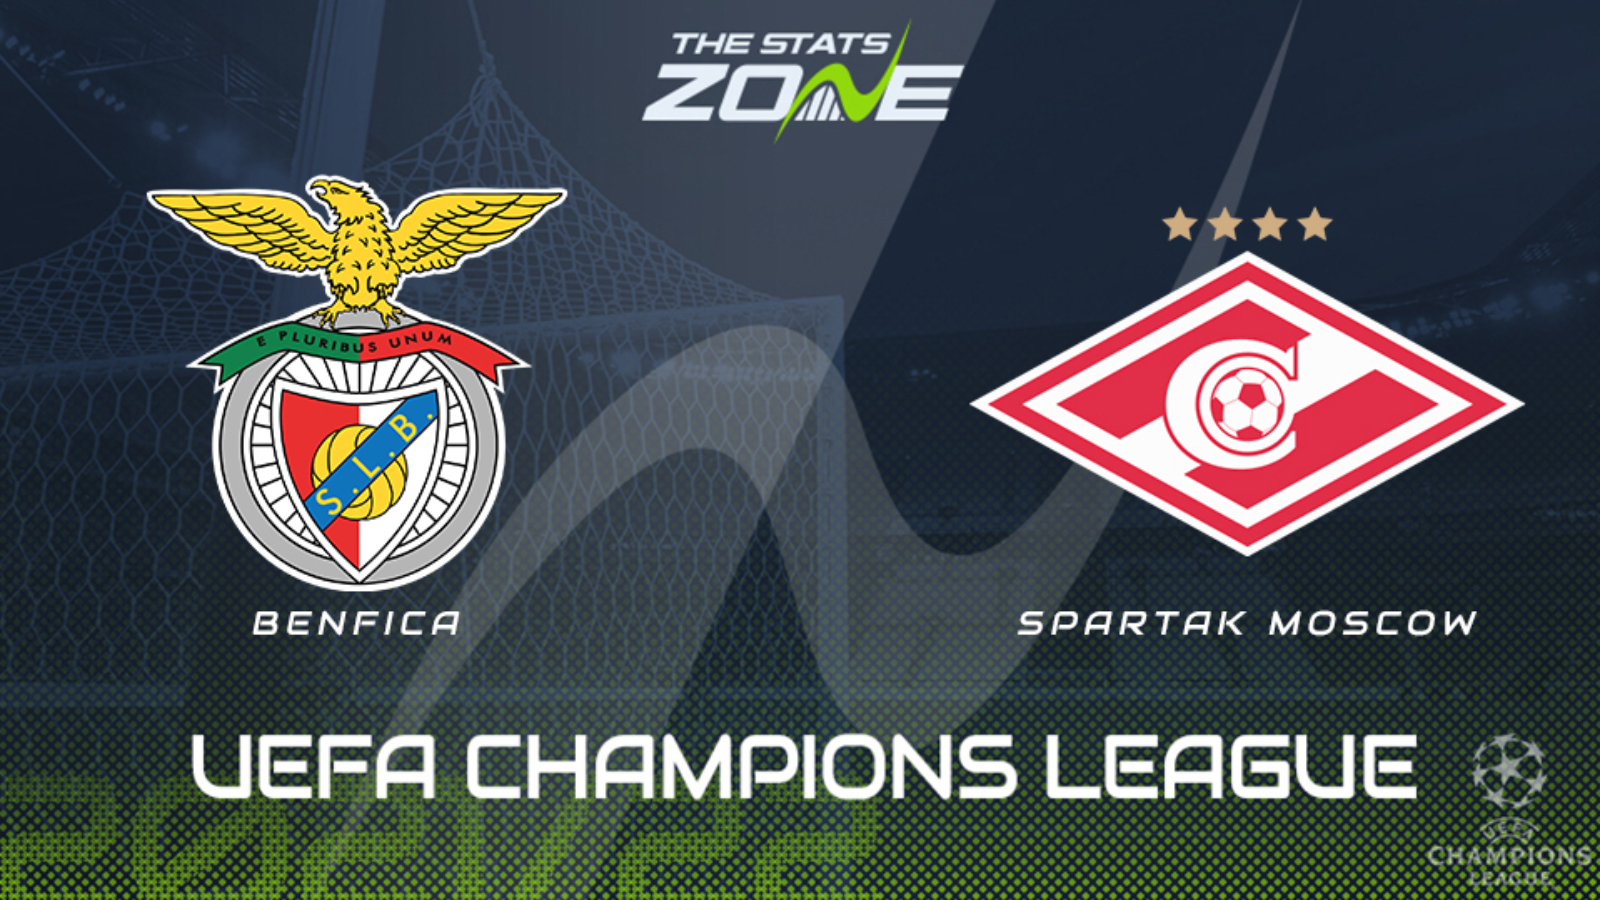 The images of the Spartak-Benfica match - SL Benfica